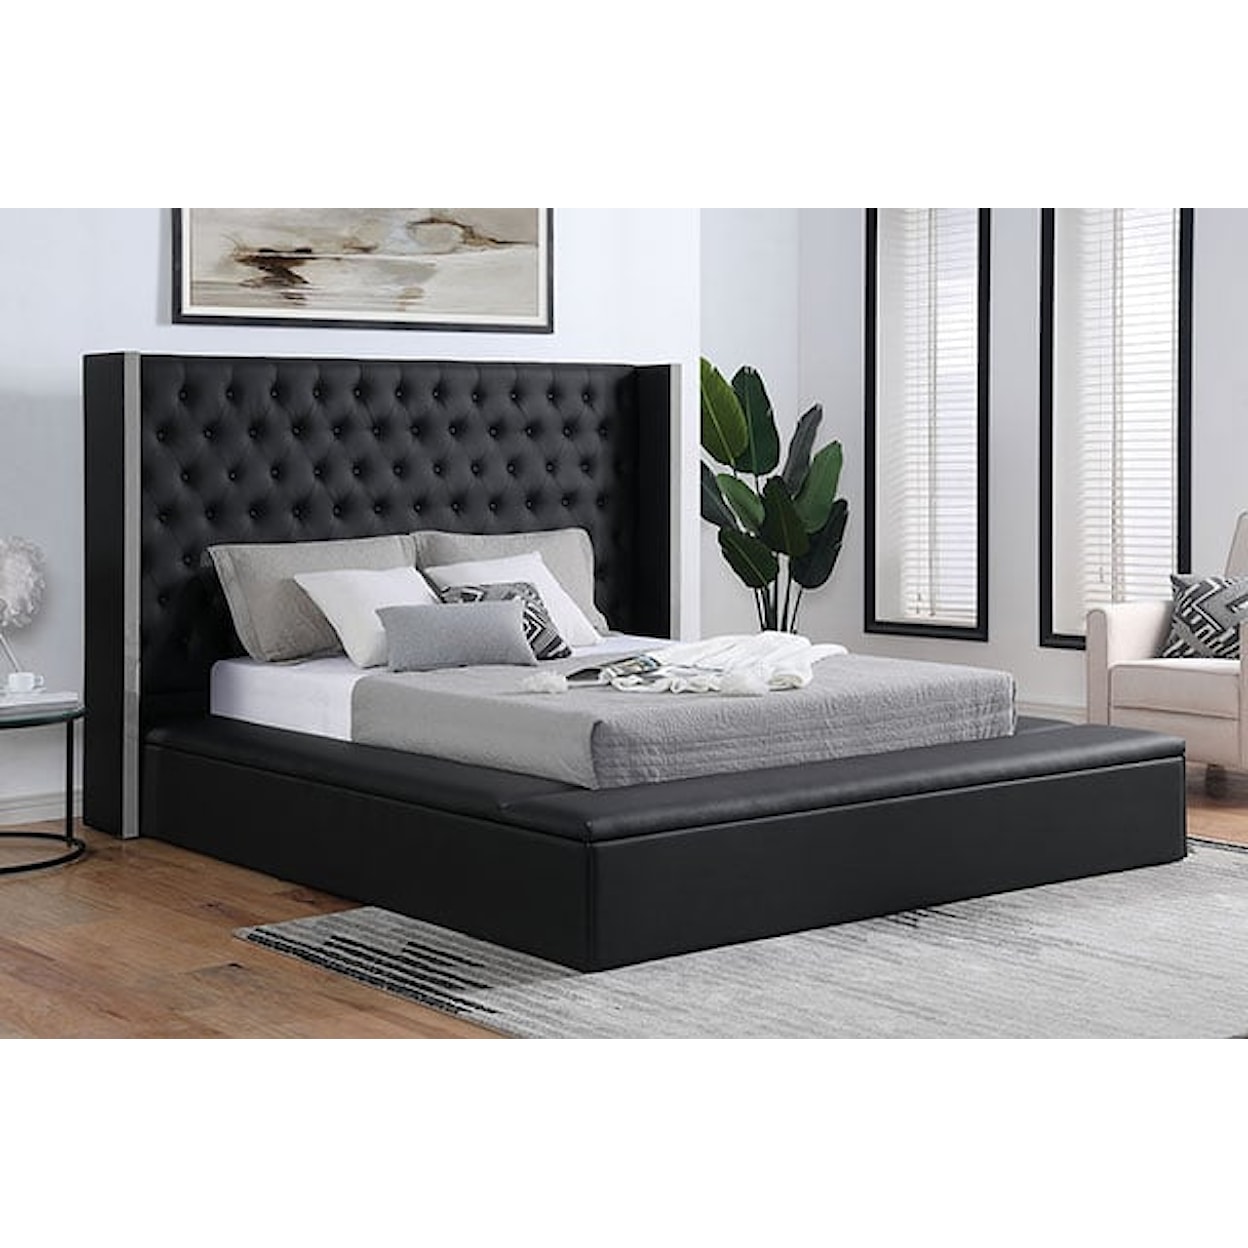 Furniture of America Eudora Upholstered Queen Bed